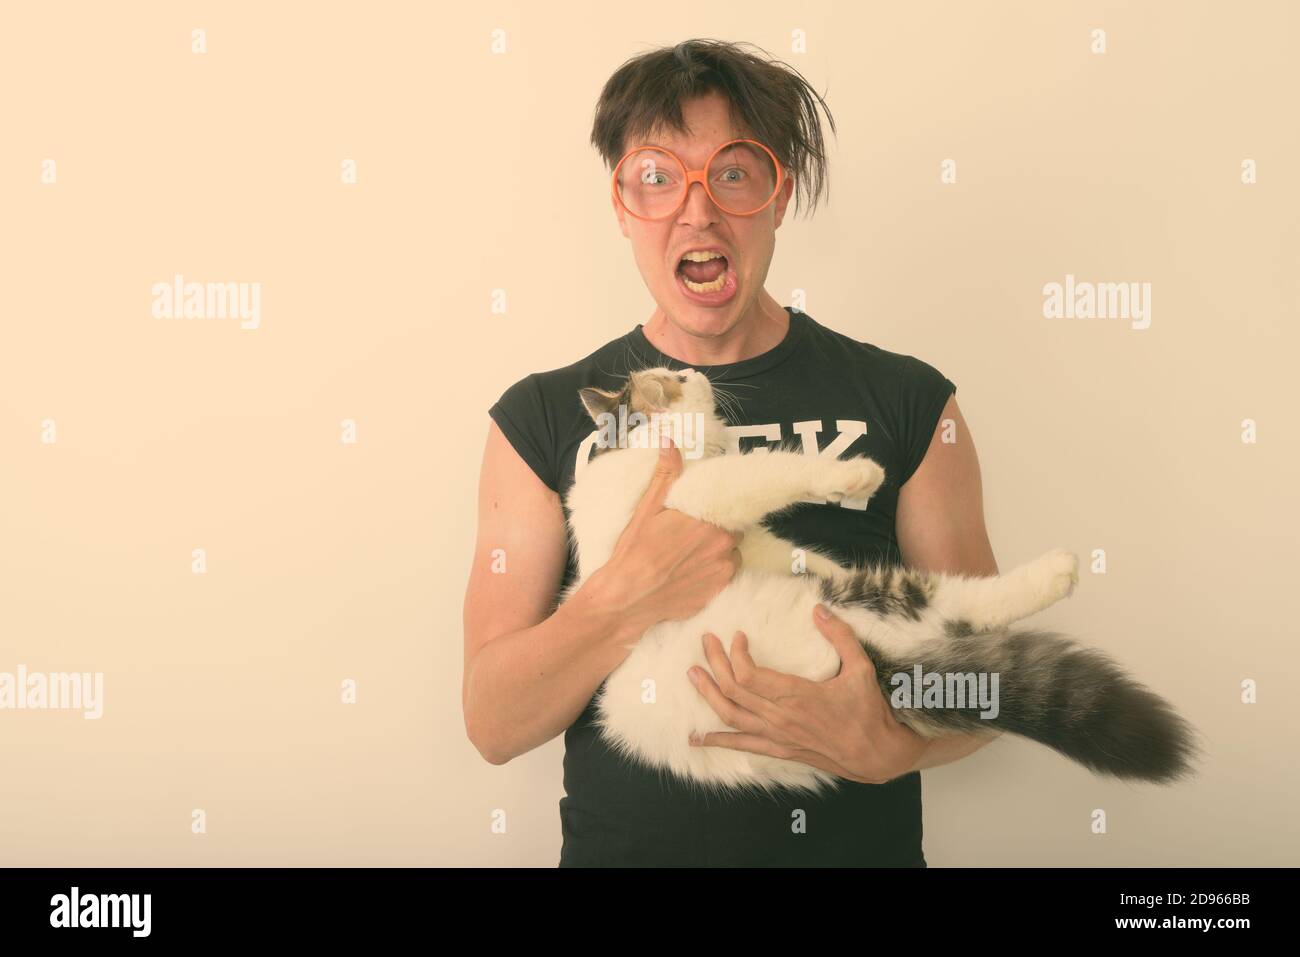 Studio shot of young nerd man looking excited while holding cute cat and wearing eyeglasses against white background Stock Photo